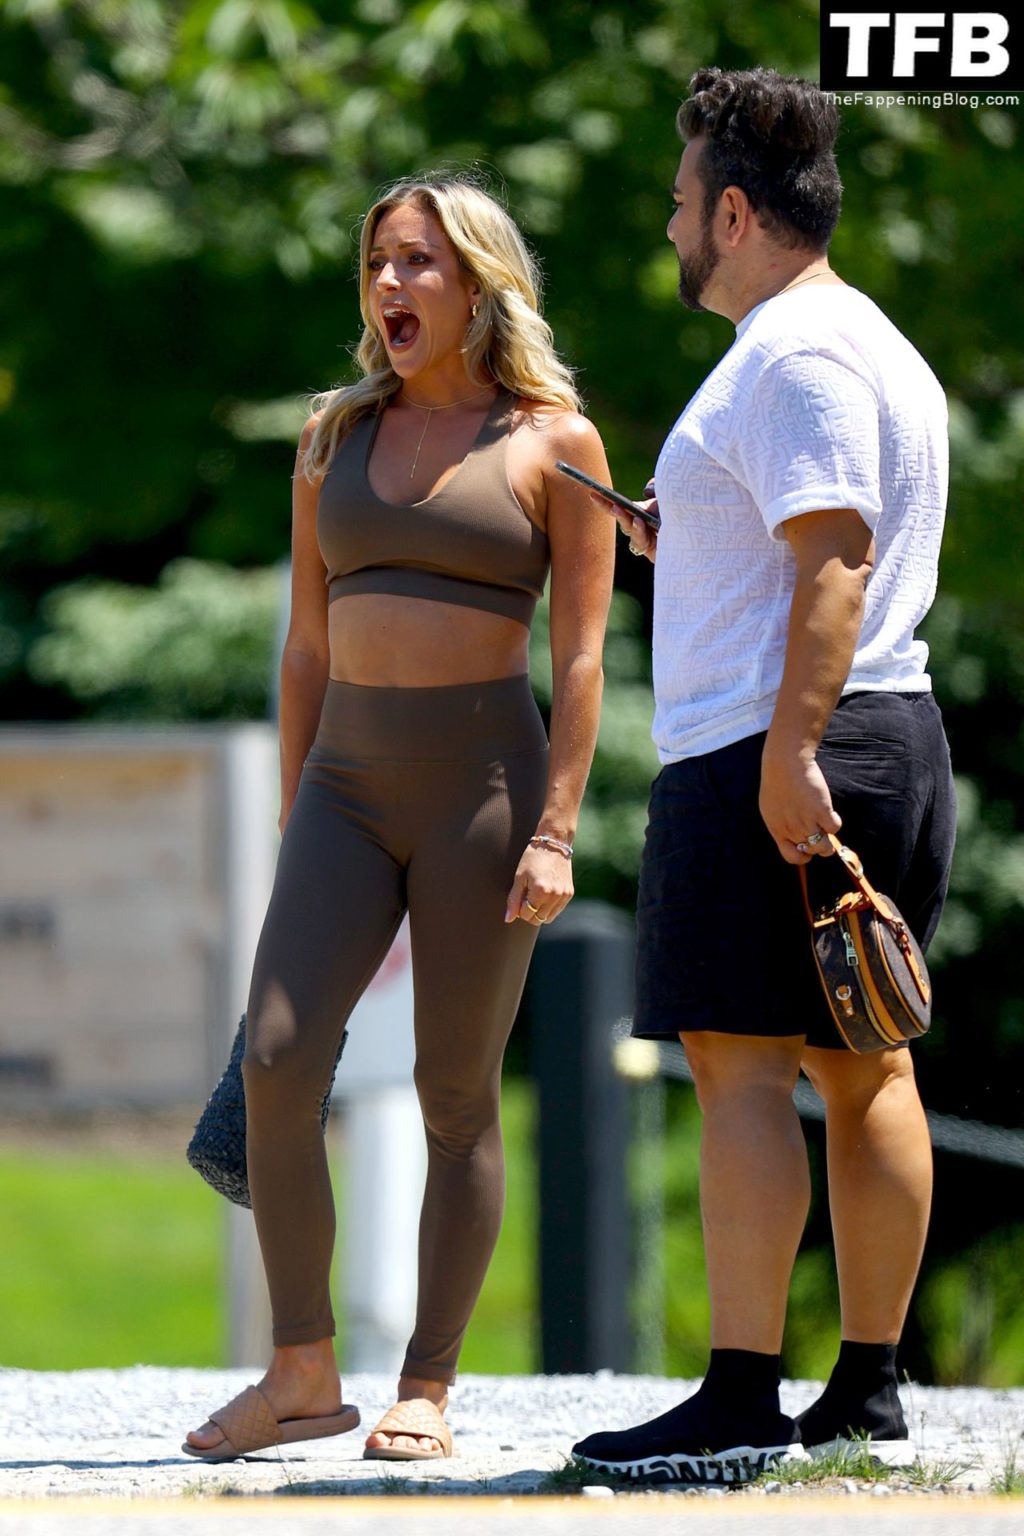 Kristin Cavallari Sexy The Fappening Blog 7 1 1024x1536 - Kristin Cavallari Shows Off Her Abs While Wearing a Brown Athleisure Outfit in East Hampton (47 Photos)